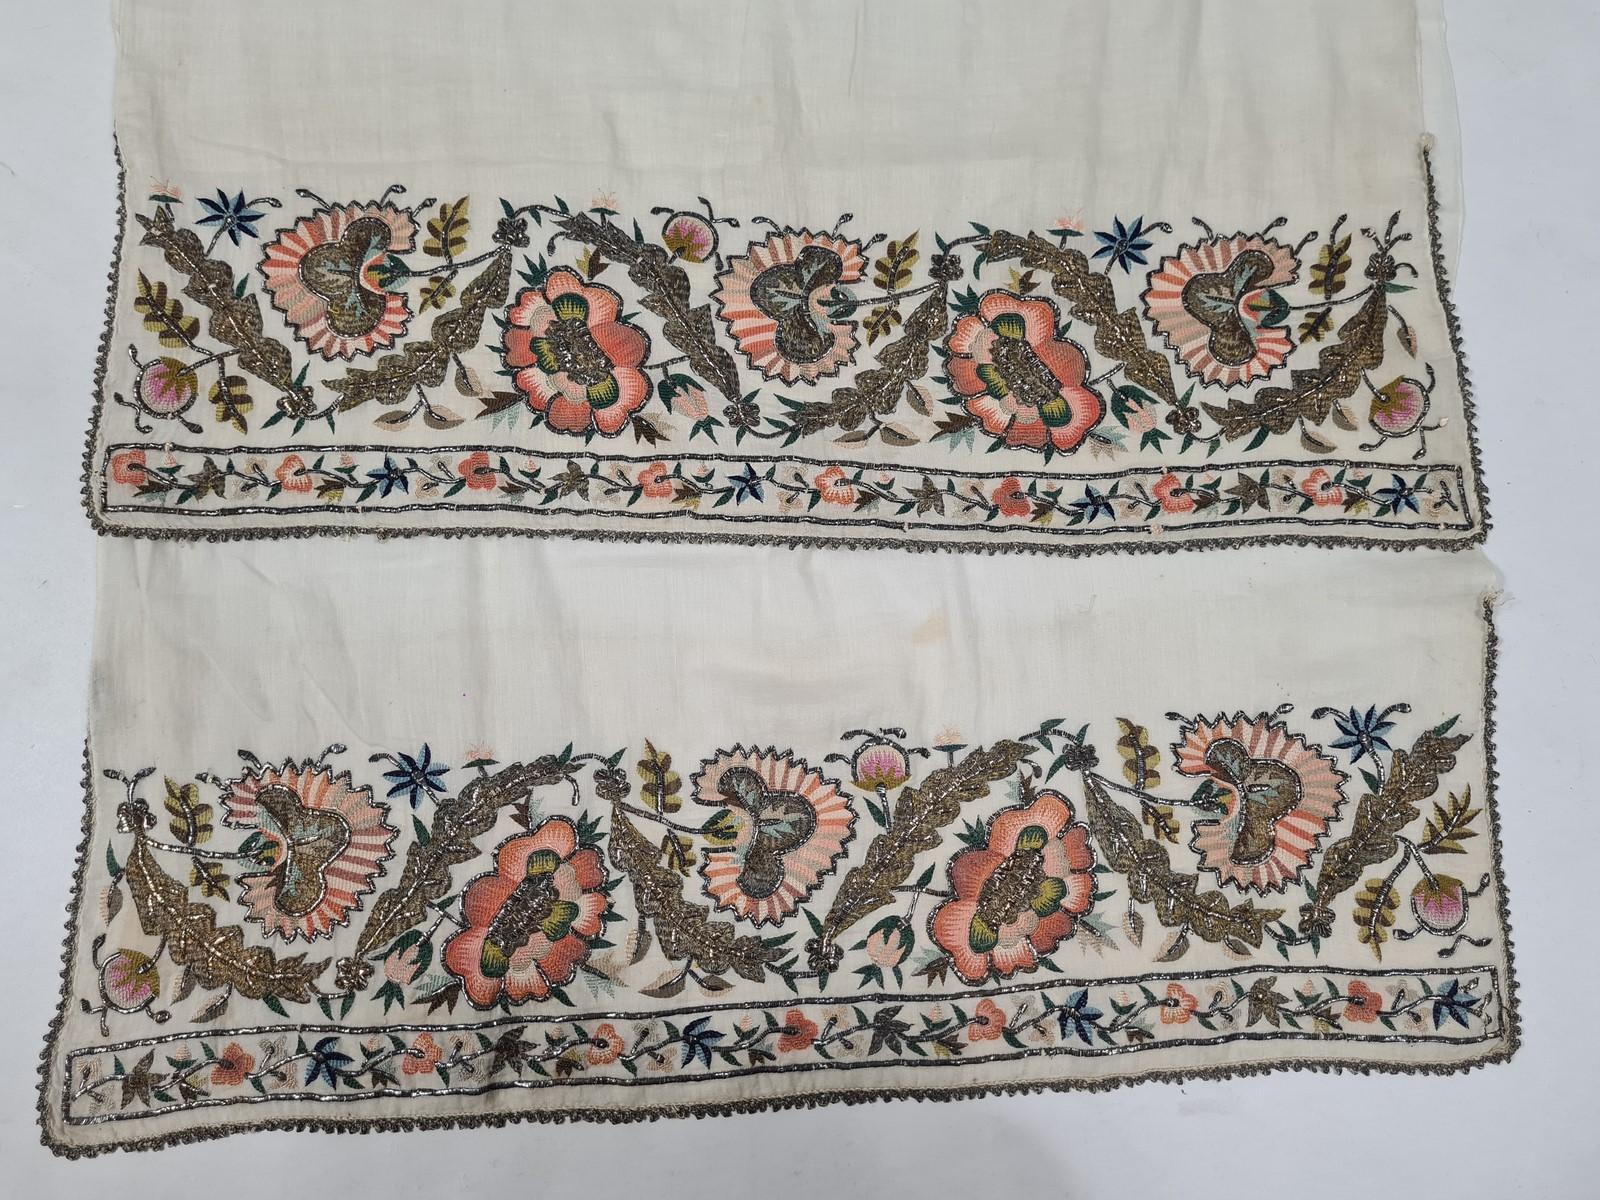 Gray Hammam Scarf in gold embroidered cotton veil - Ottoman Empire late 18th century